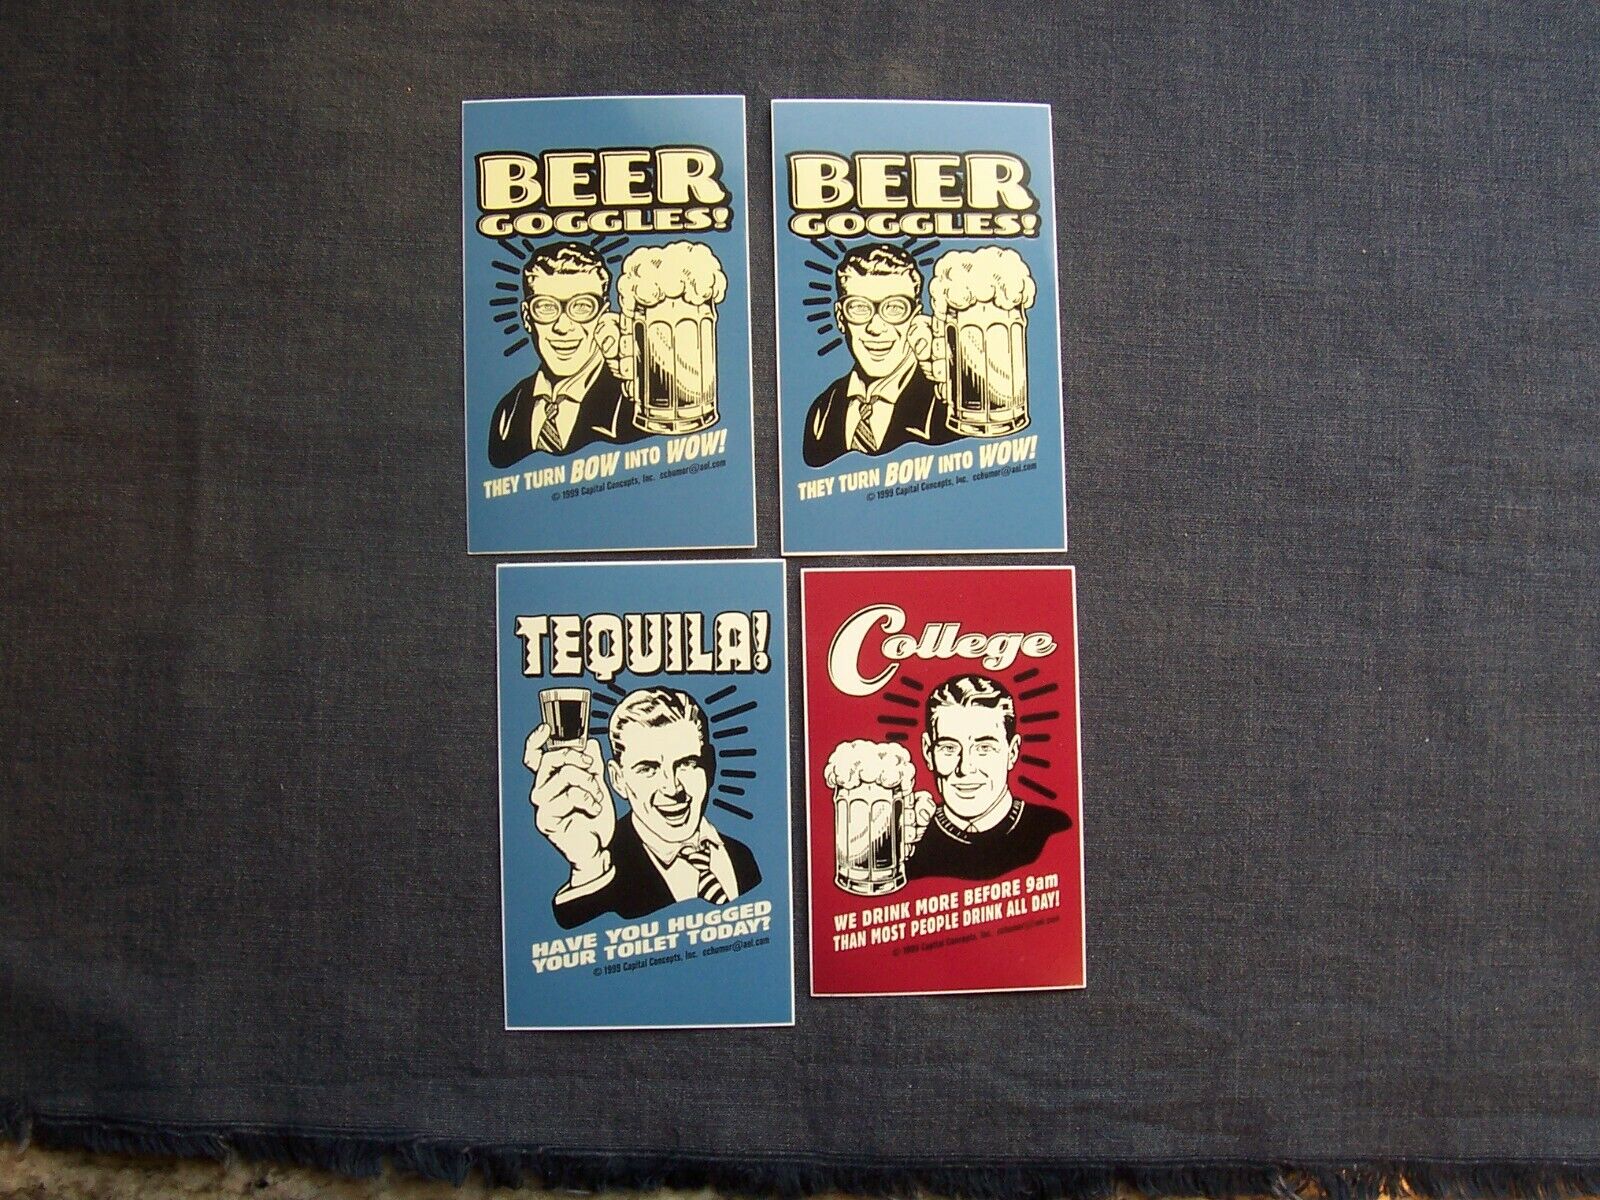 lot of comical / humor cards  Beer Goggles They Turn Bow into Wow & Tequila etc